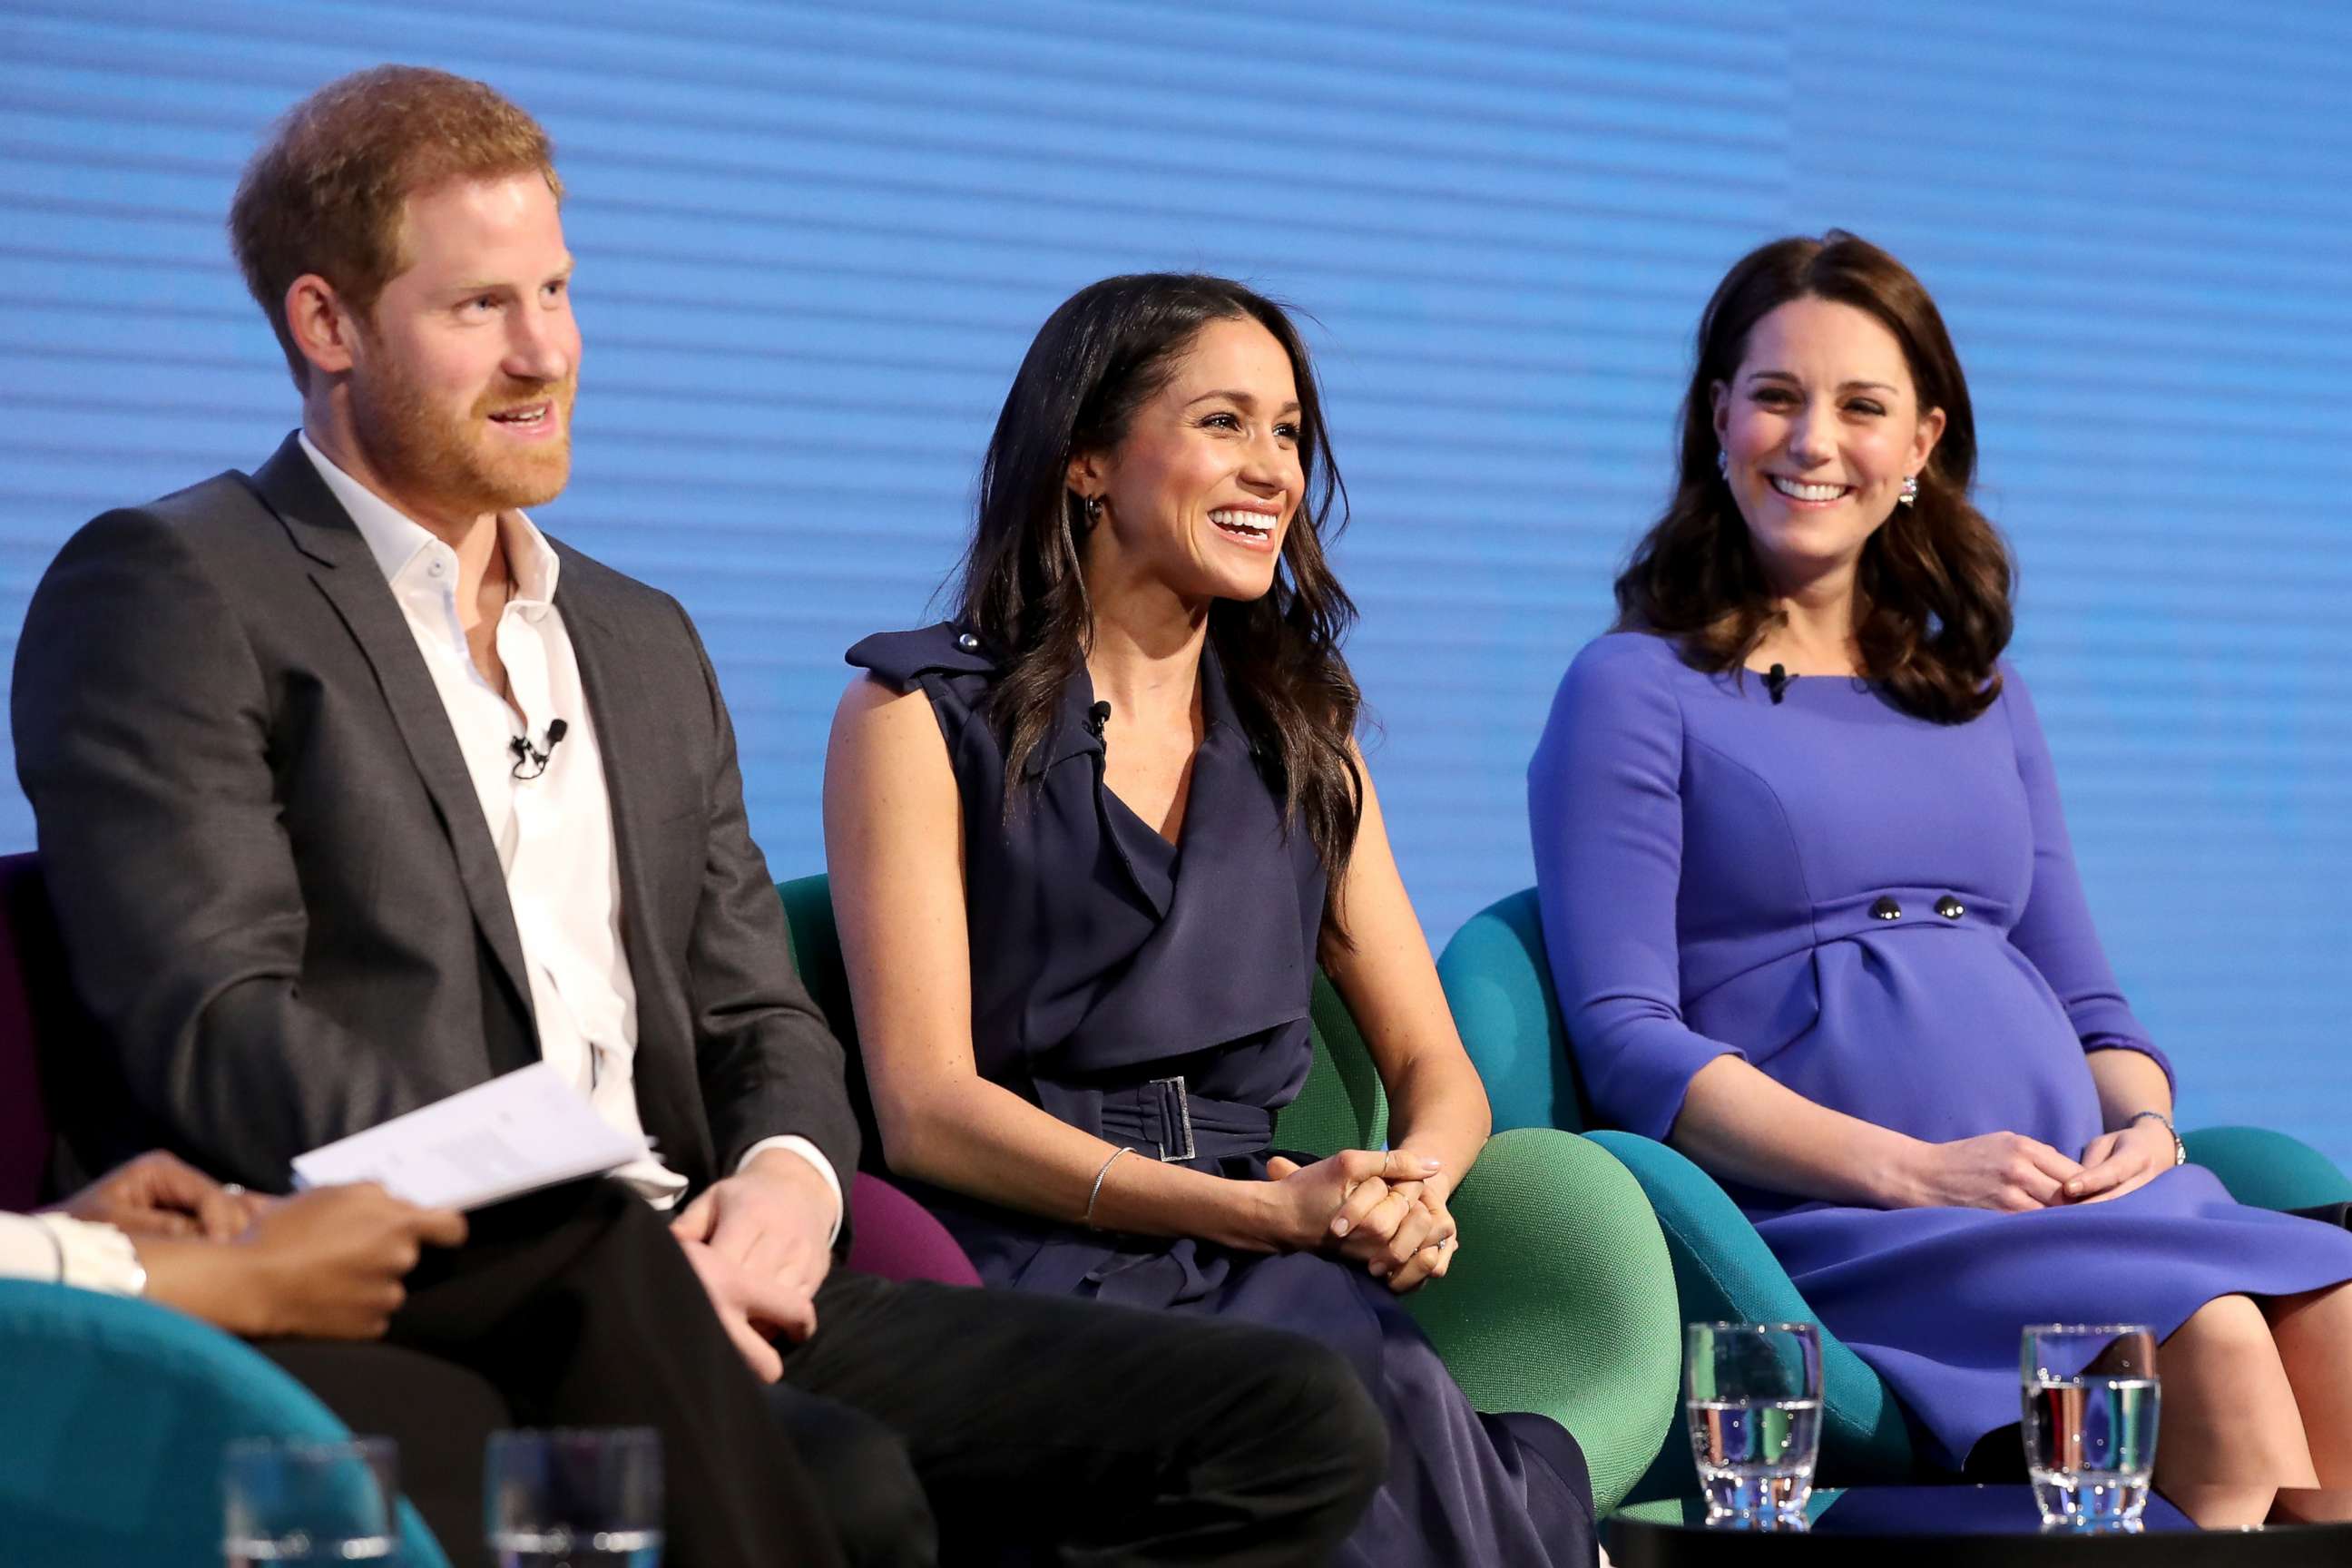 PHOTO: Prince Harry, Meghan Markle and  Catherine, Duchess of Cambridge attend the first annual Royal Foundation Forum held at Aviva, Feb. 28, 2018 in London.